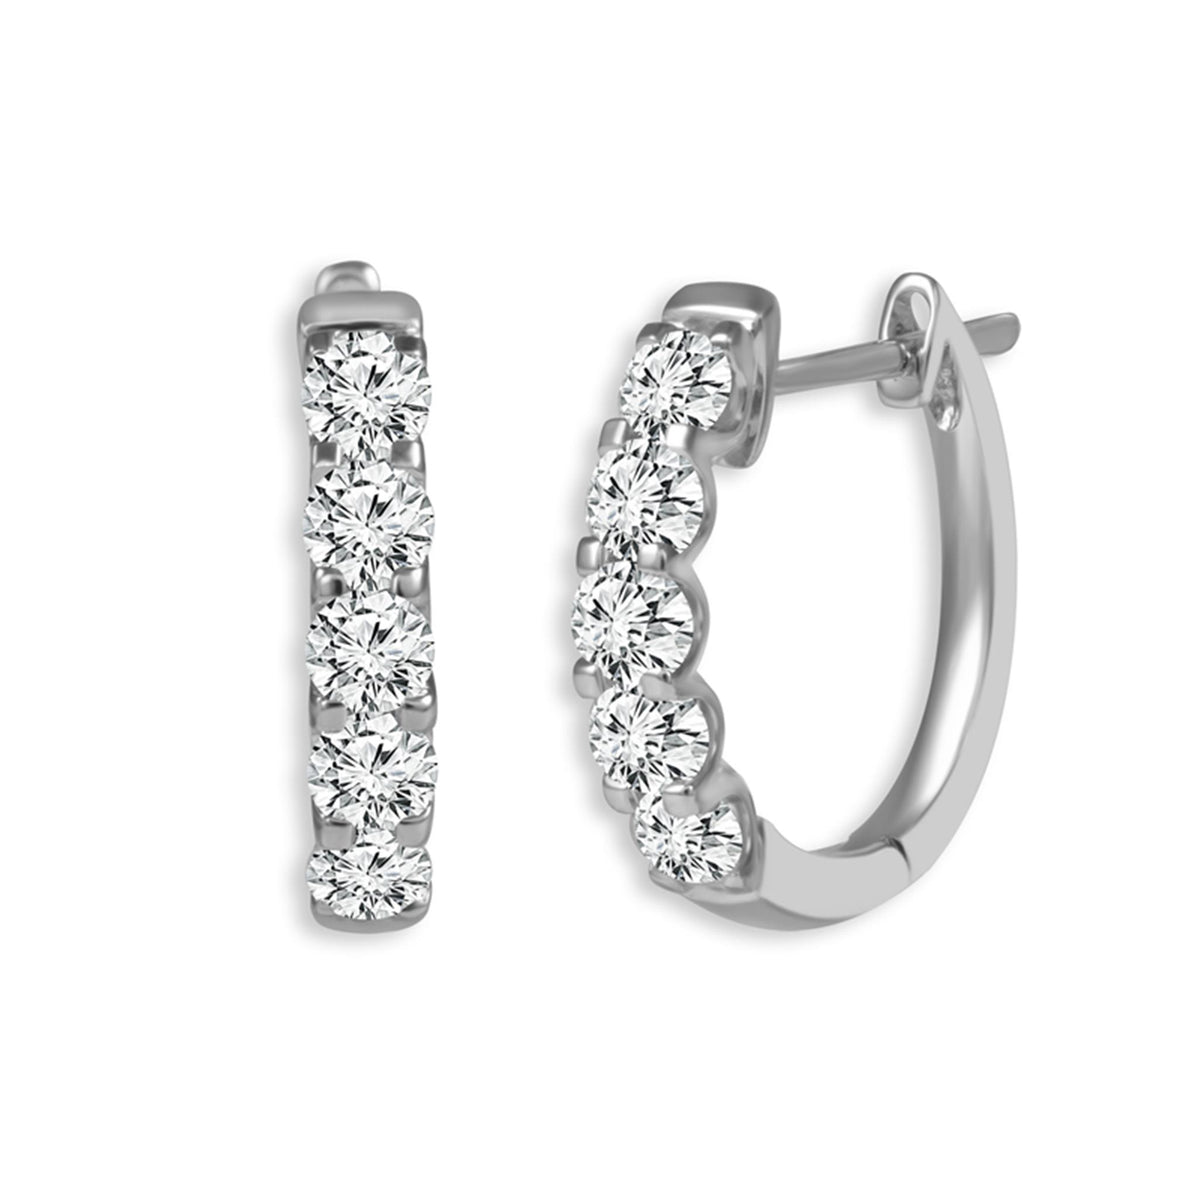 14Kt White Gold Round Hoop Earrings With 3.00cttw Natural Diamonds